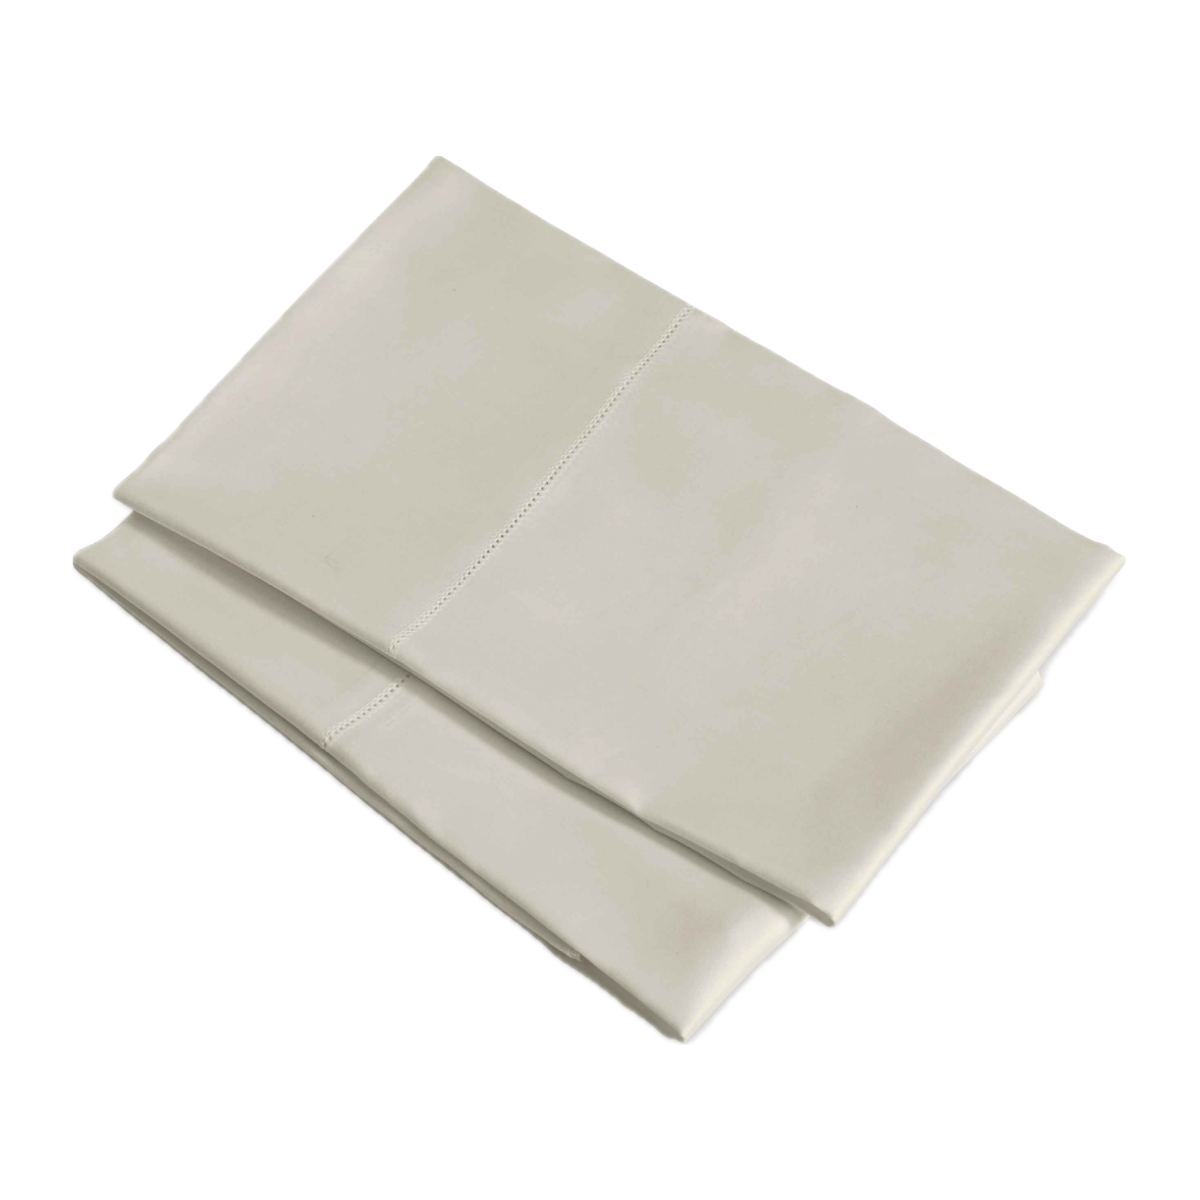 Pair of Folded Pillowcases of Pearl Signoria Nuvola Percale Bedding